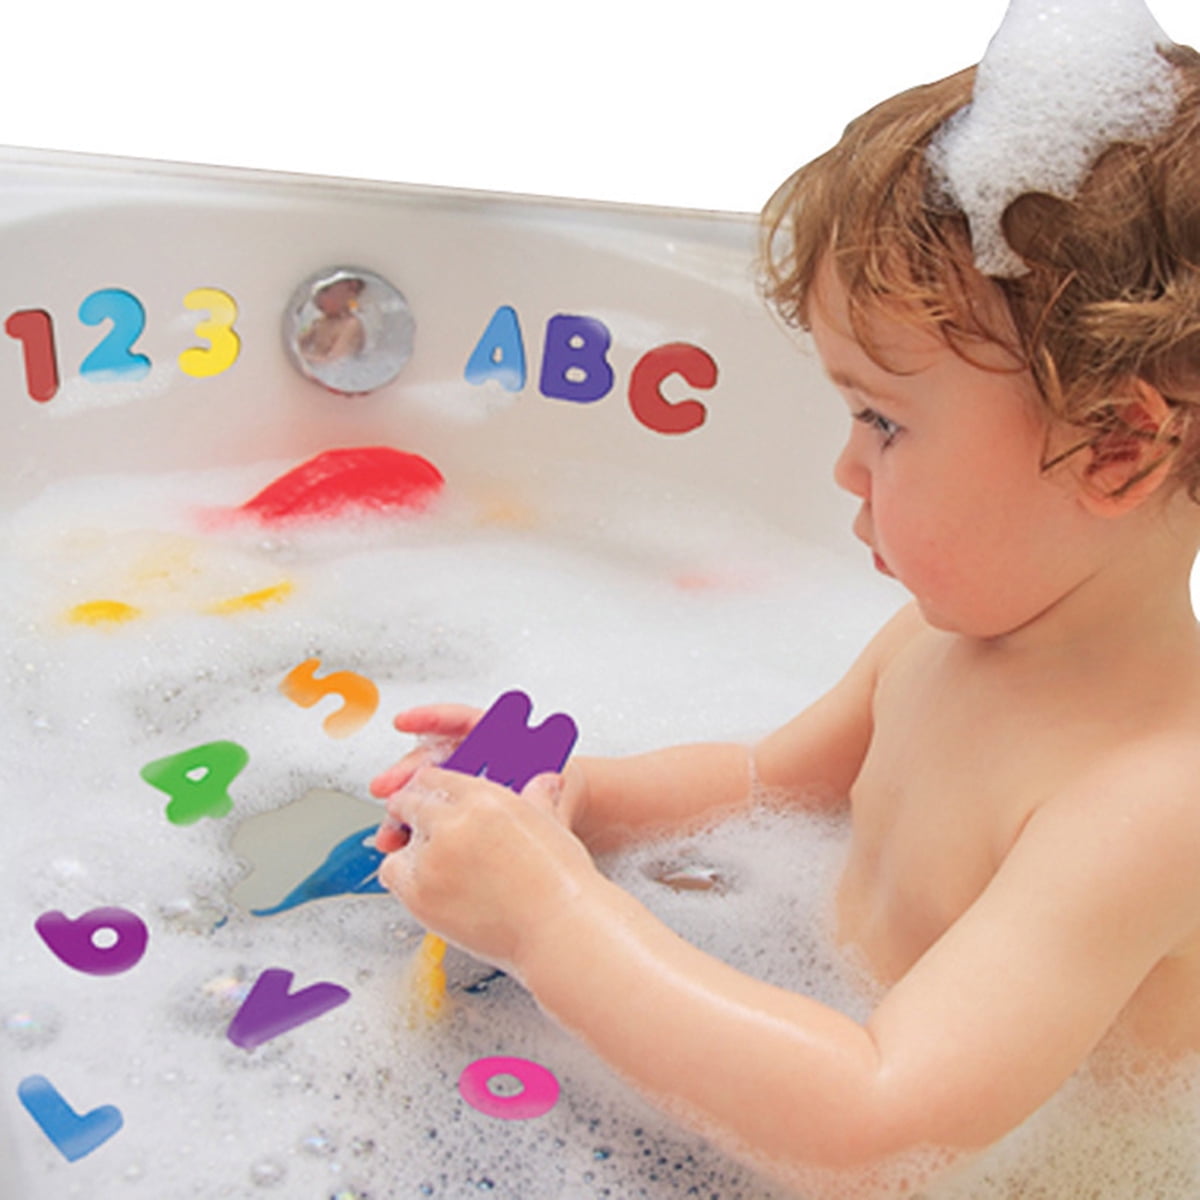 3Non-toxic Learn Colorful Soft Foam Bath Bathtub Letters And Numbers Toy 